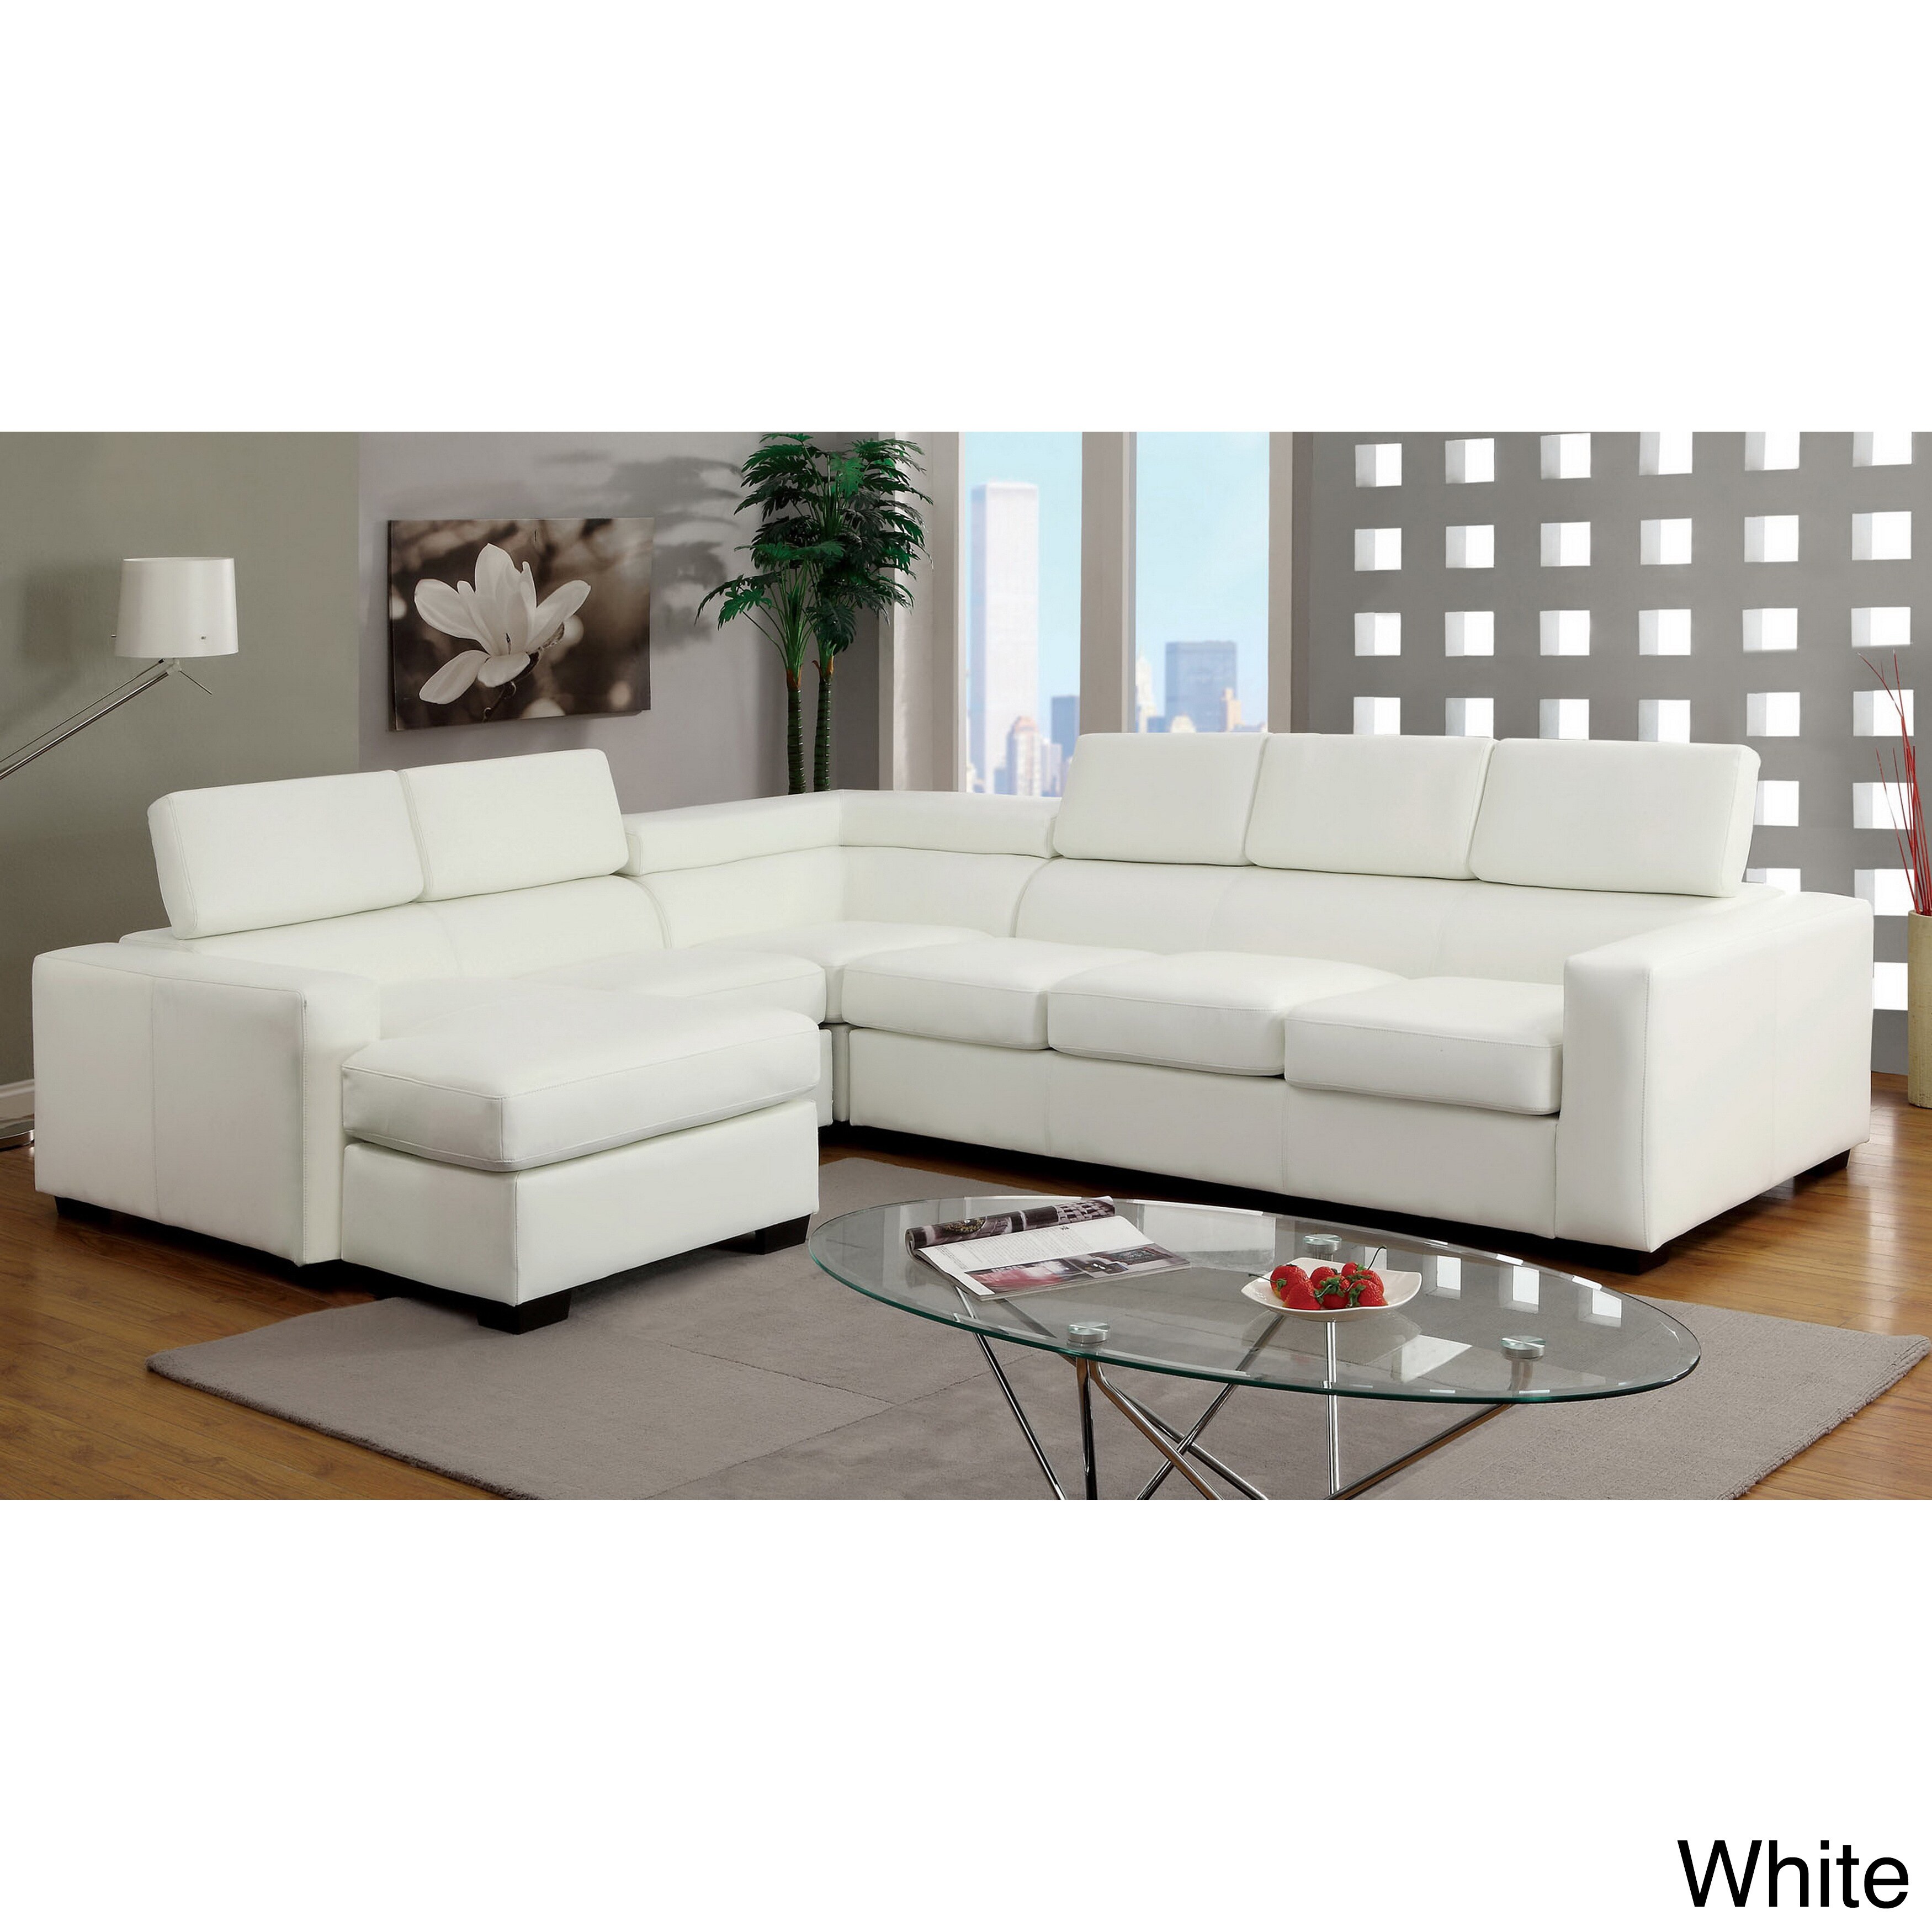 Furniture Of America Serriz 3 piece Bonded Leather Sectional With Optional Chaise